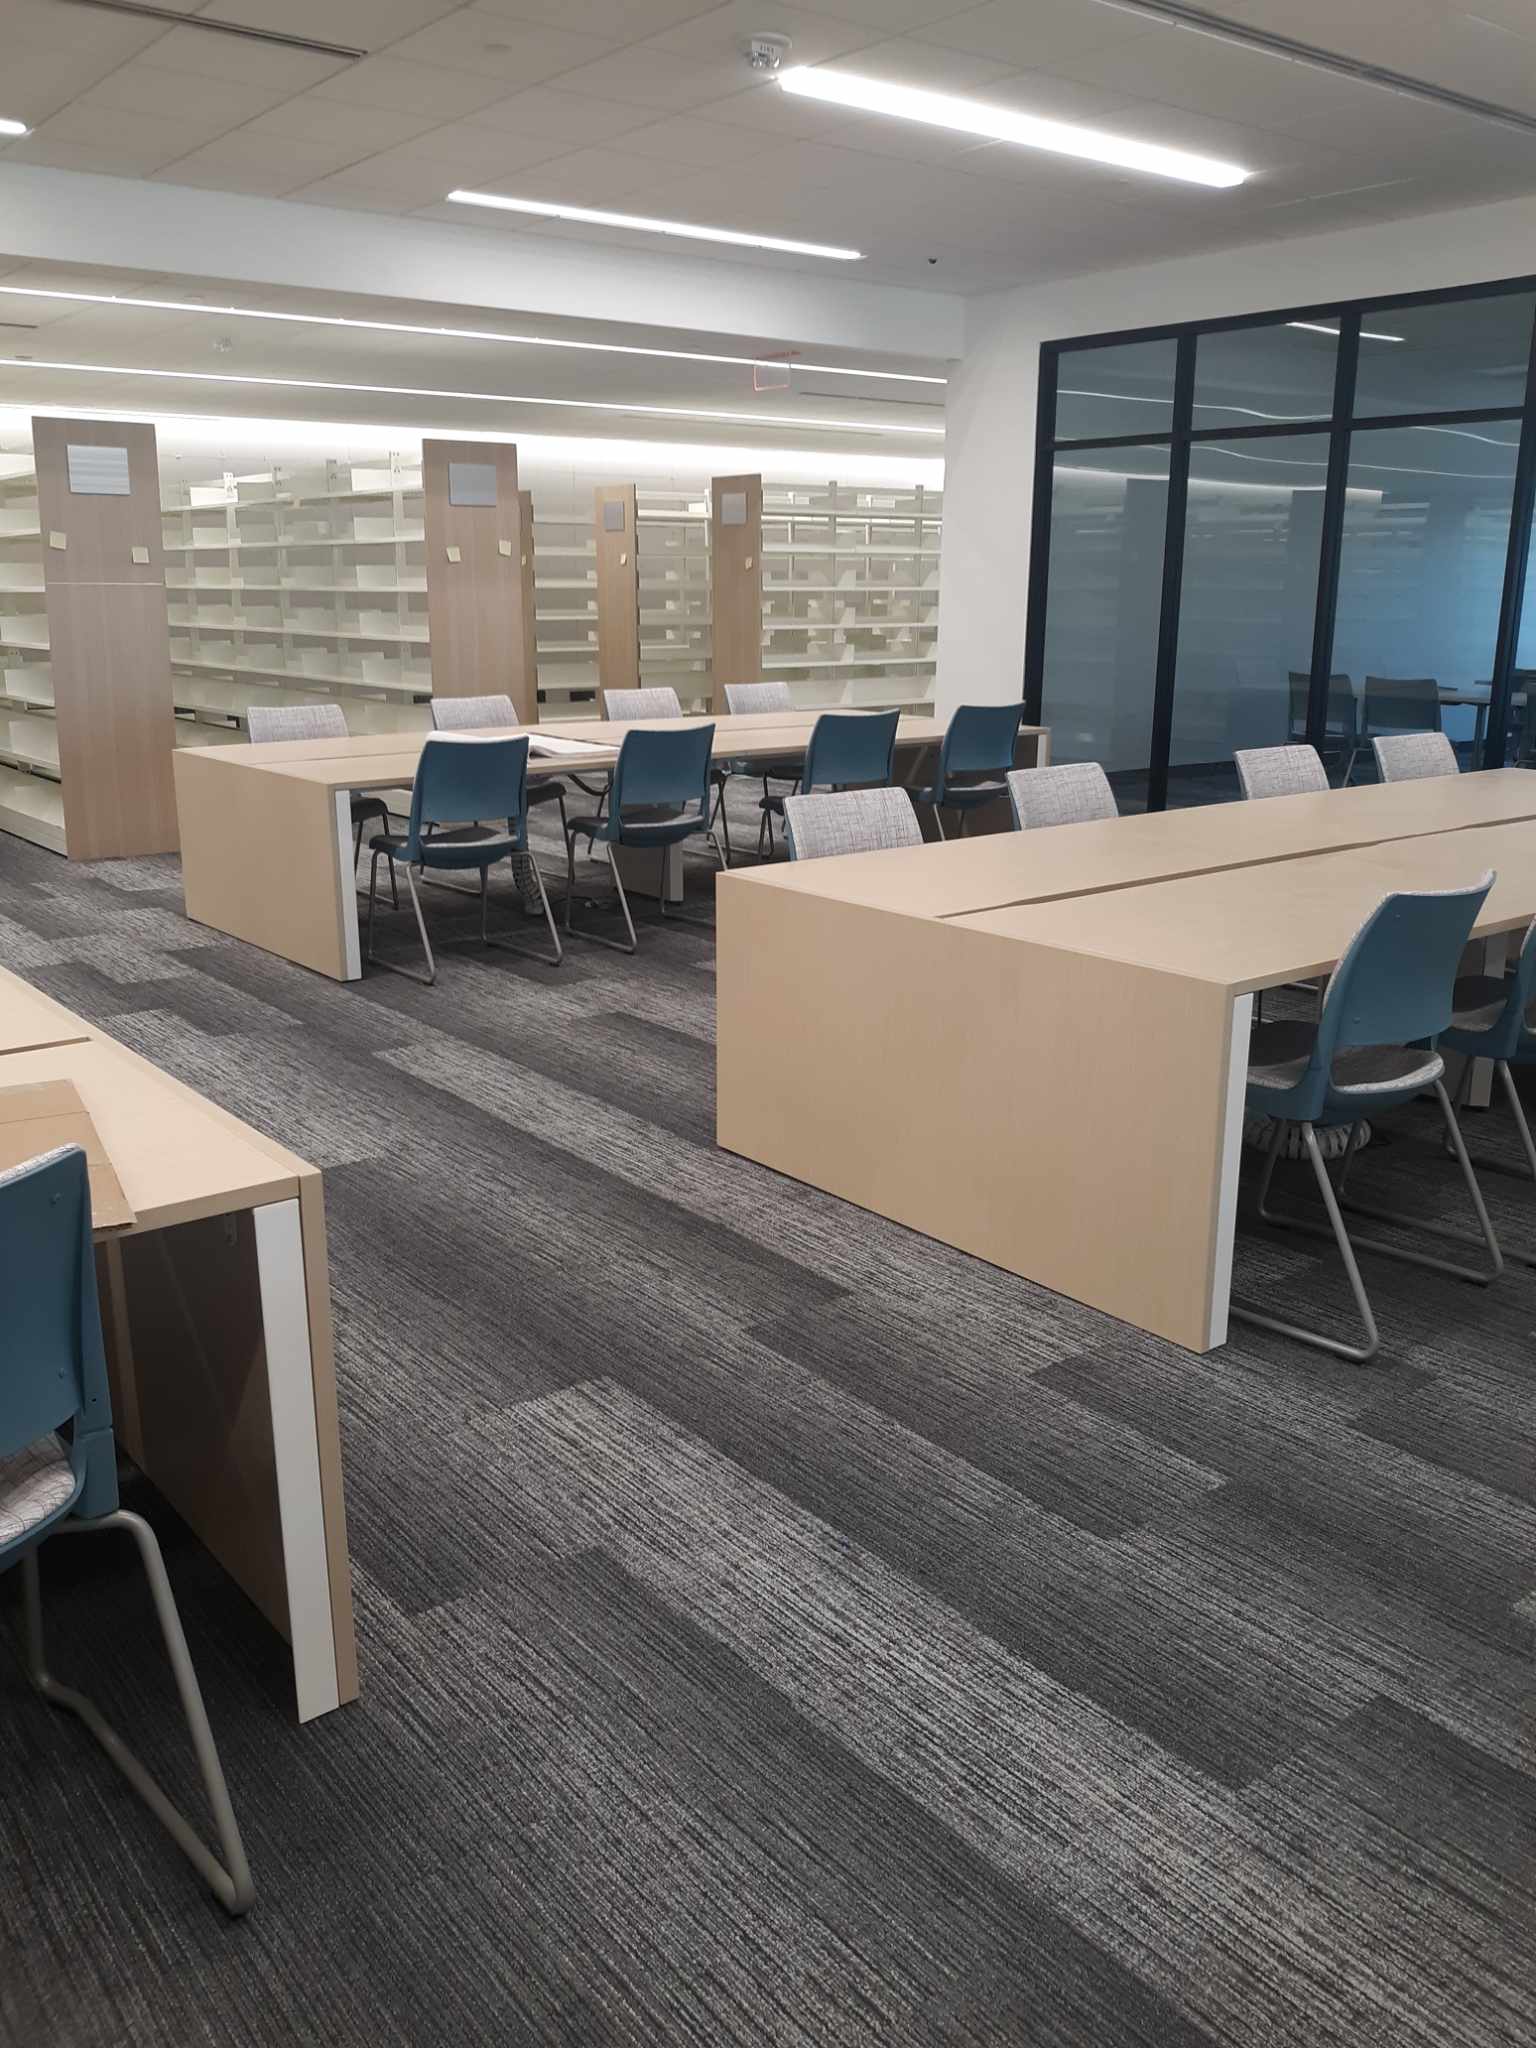 Empty bookshelves and tables in the new west side area of the building.